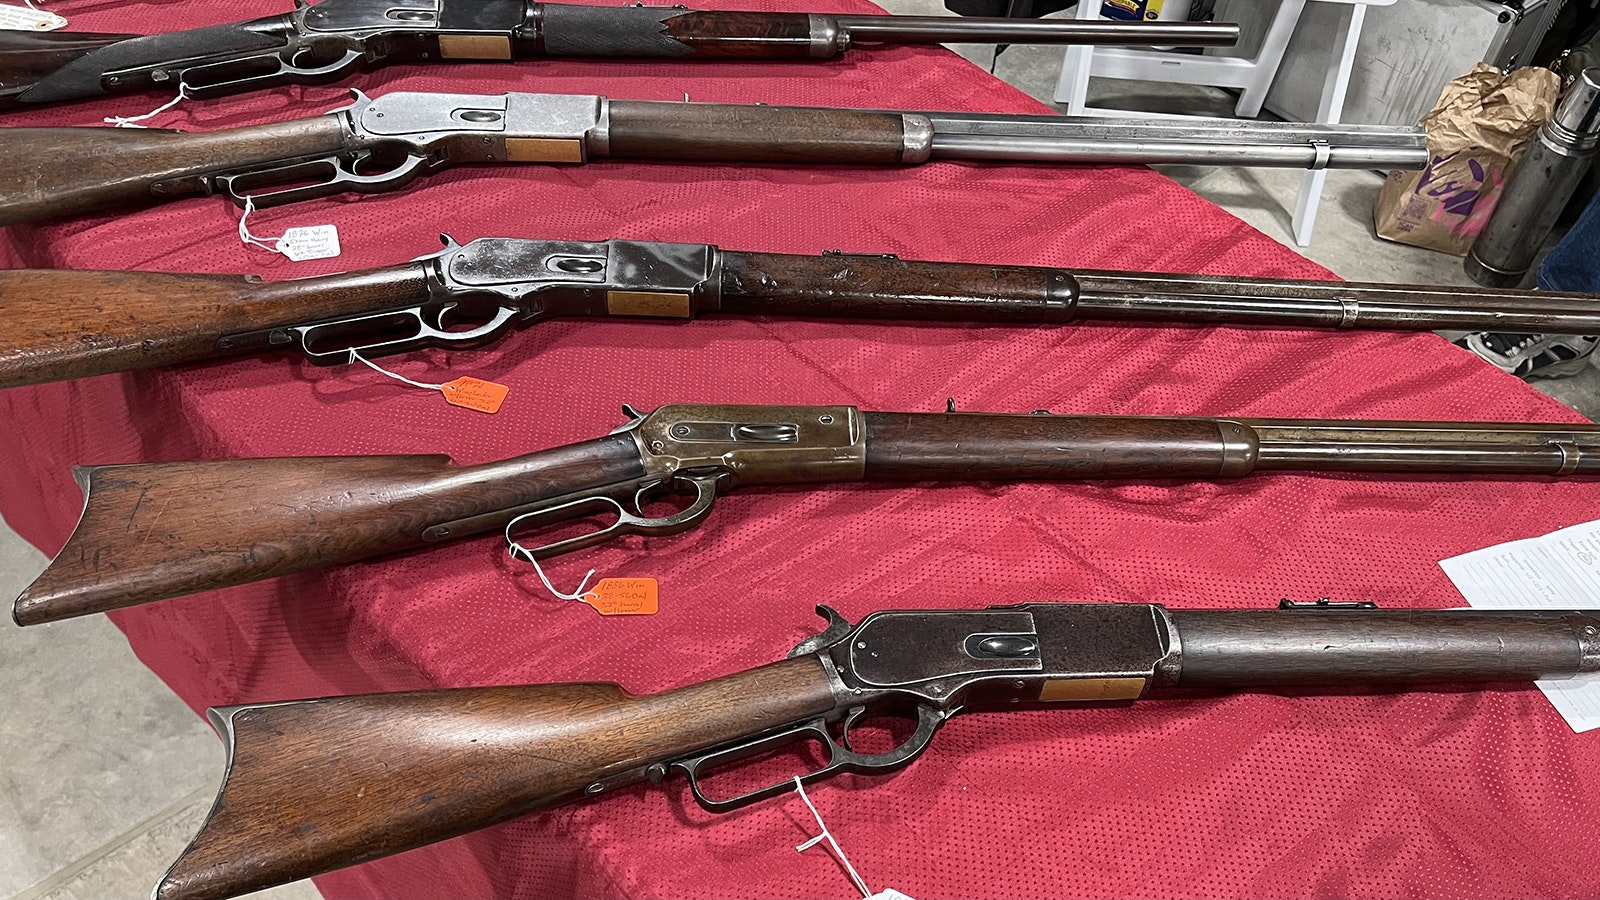 These 1876 Winchester rifles were displayed by Greg Garlick on Saturday at the New Frontier Gun Show and Western Collectibles Show in Cheyenne.